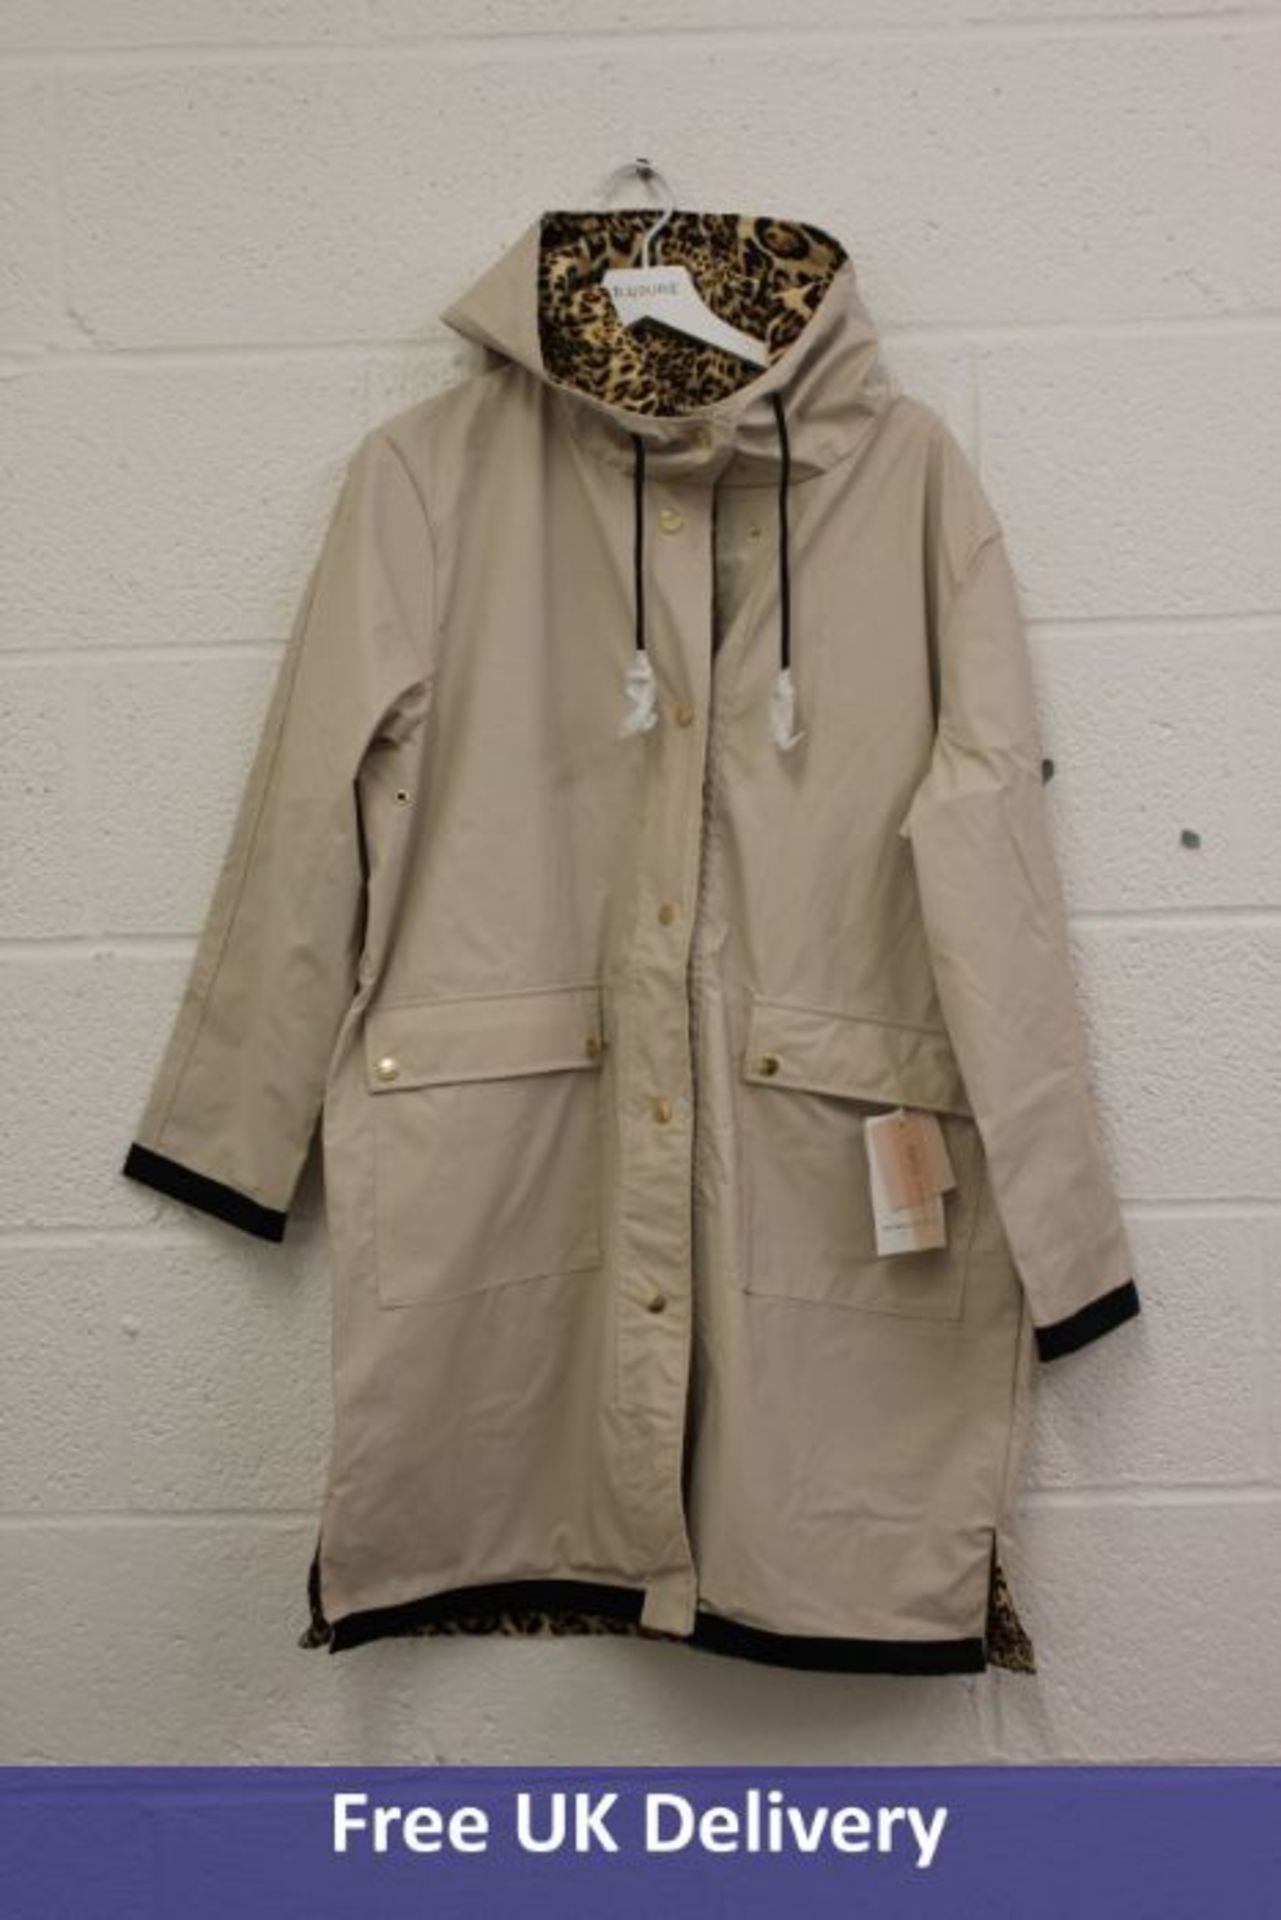 Two items of Rino & Pelle Women's Clothing to include 1x Caramba Raincoat White Swan, Size 38 and 1x